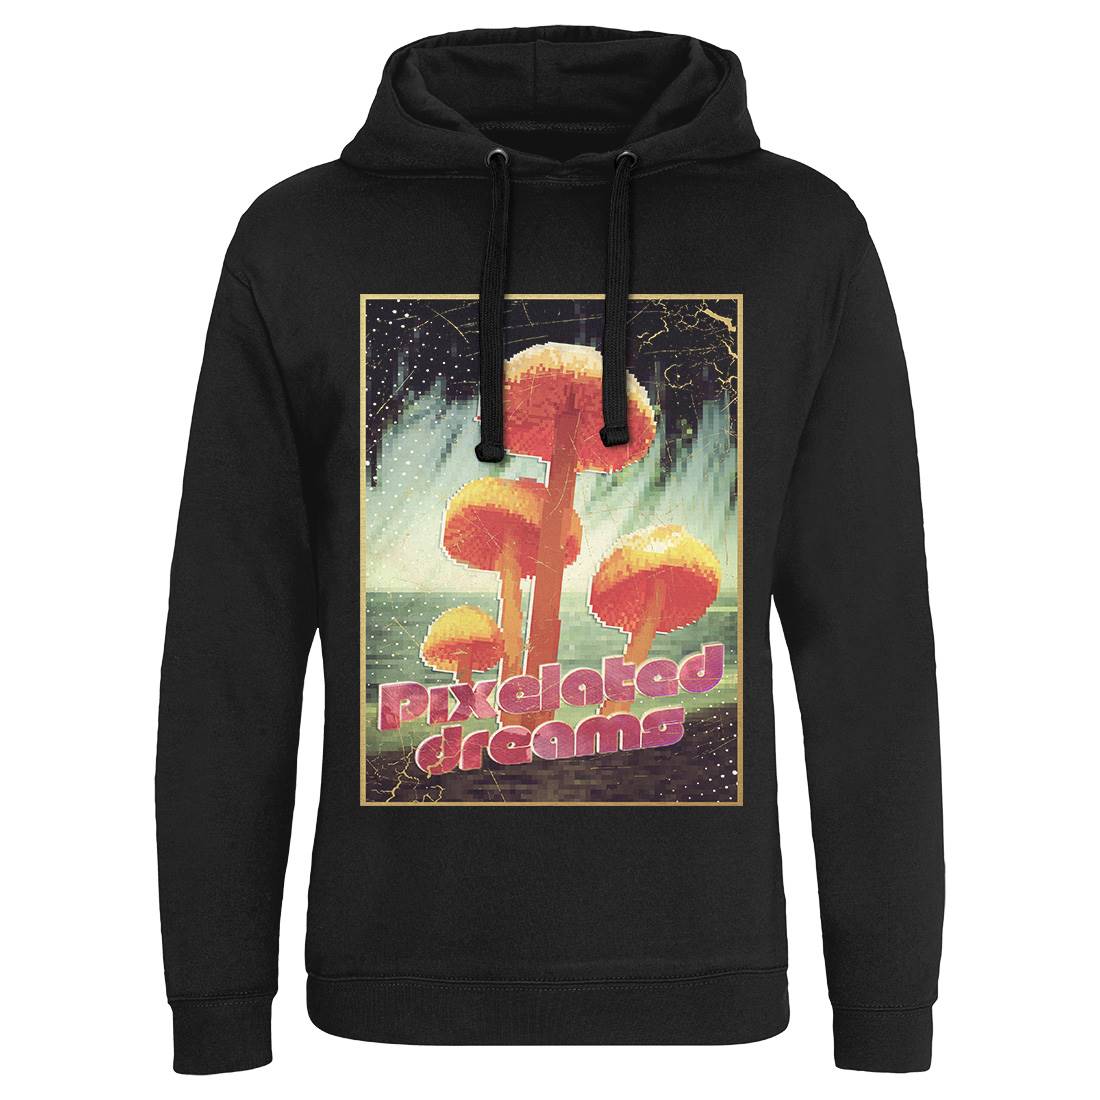 Pixelated Dreams Mens Hoodie Without Pocket Drugs A893